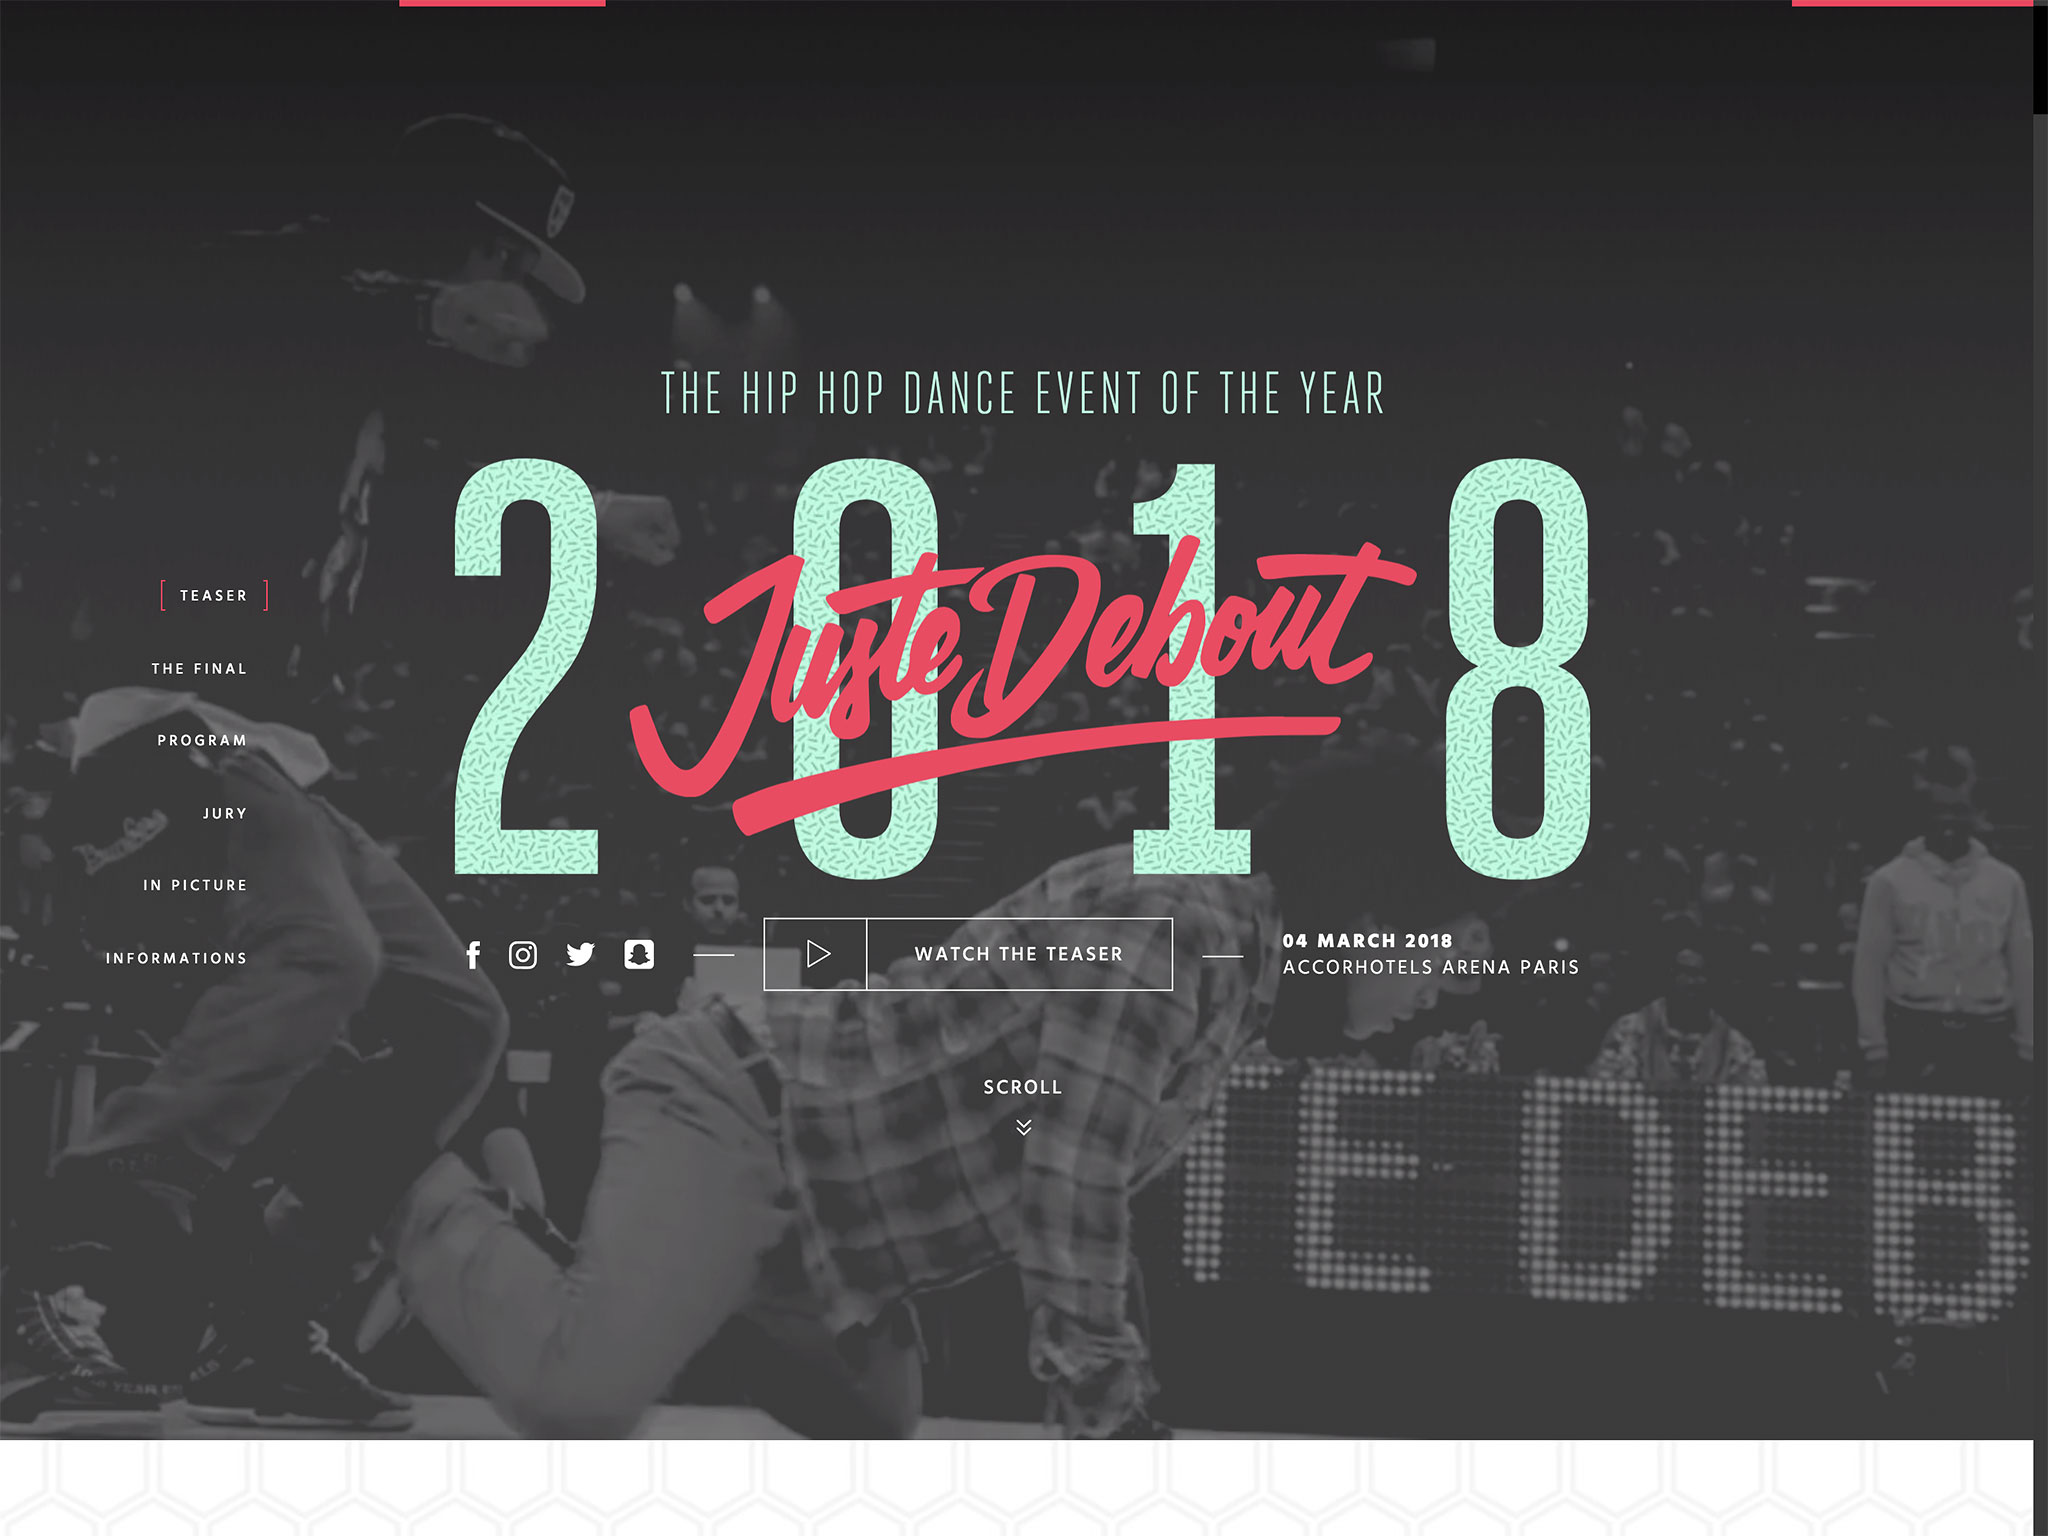 Juste Debout 2018 – The hip hop dance event of the year